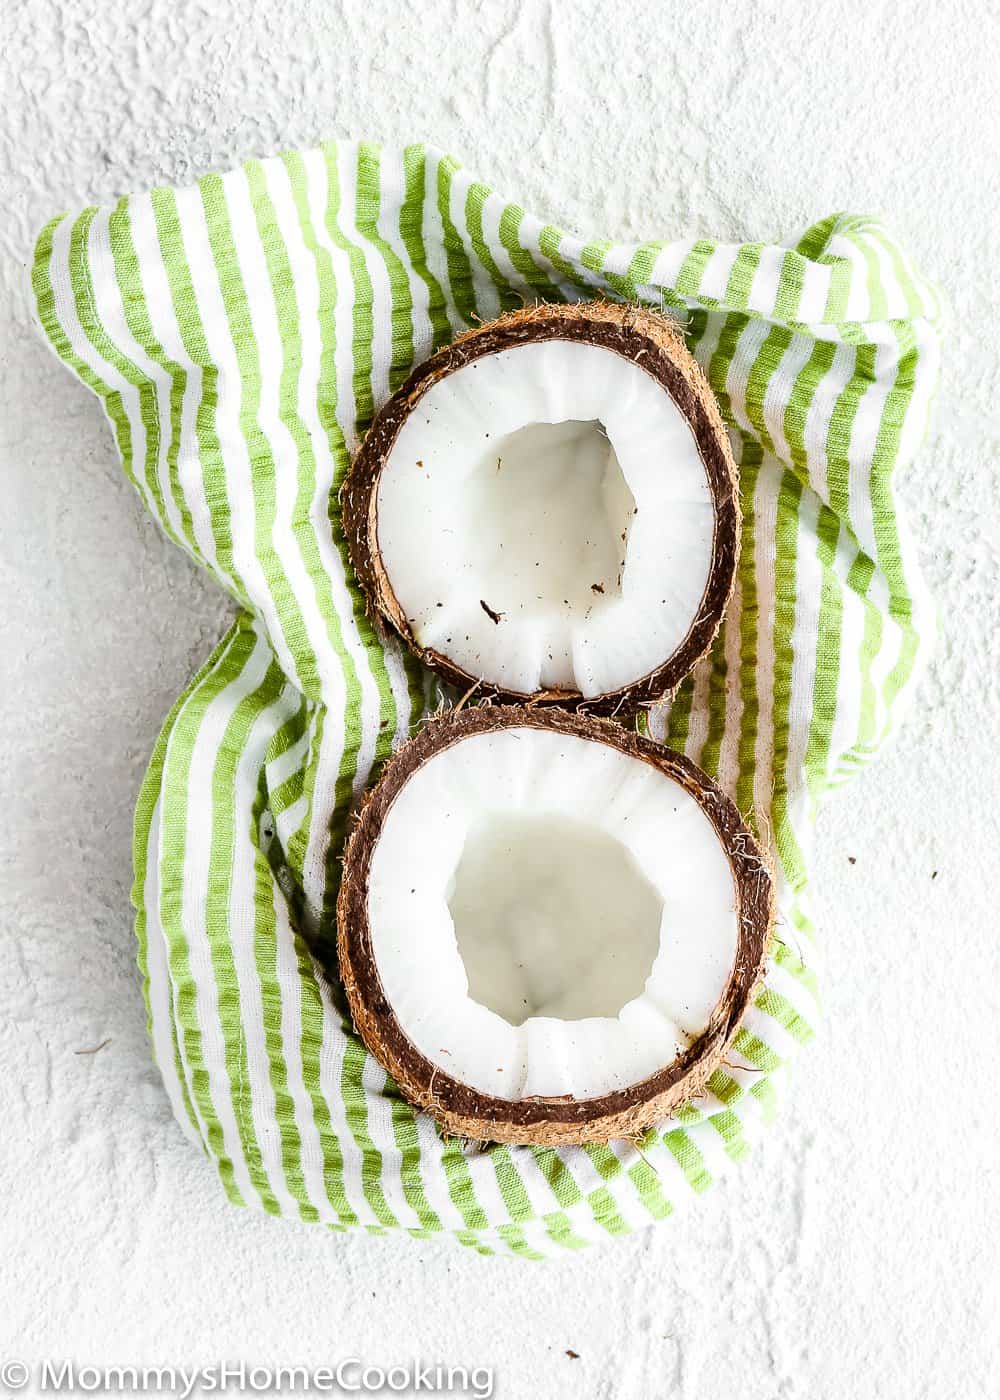 a crack open coconut over a kitchen towel.